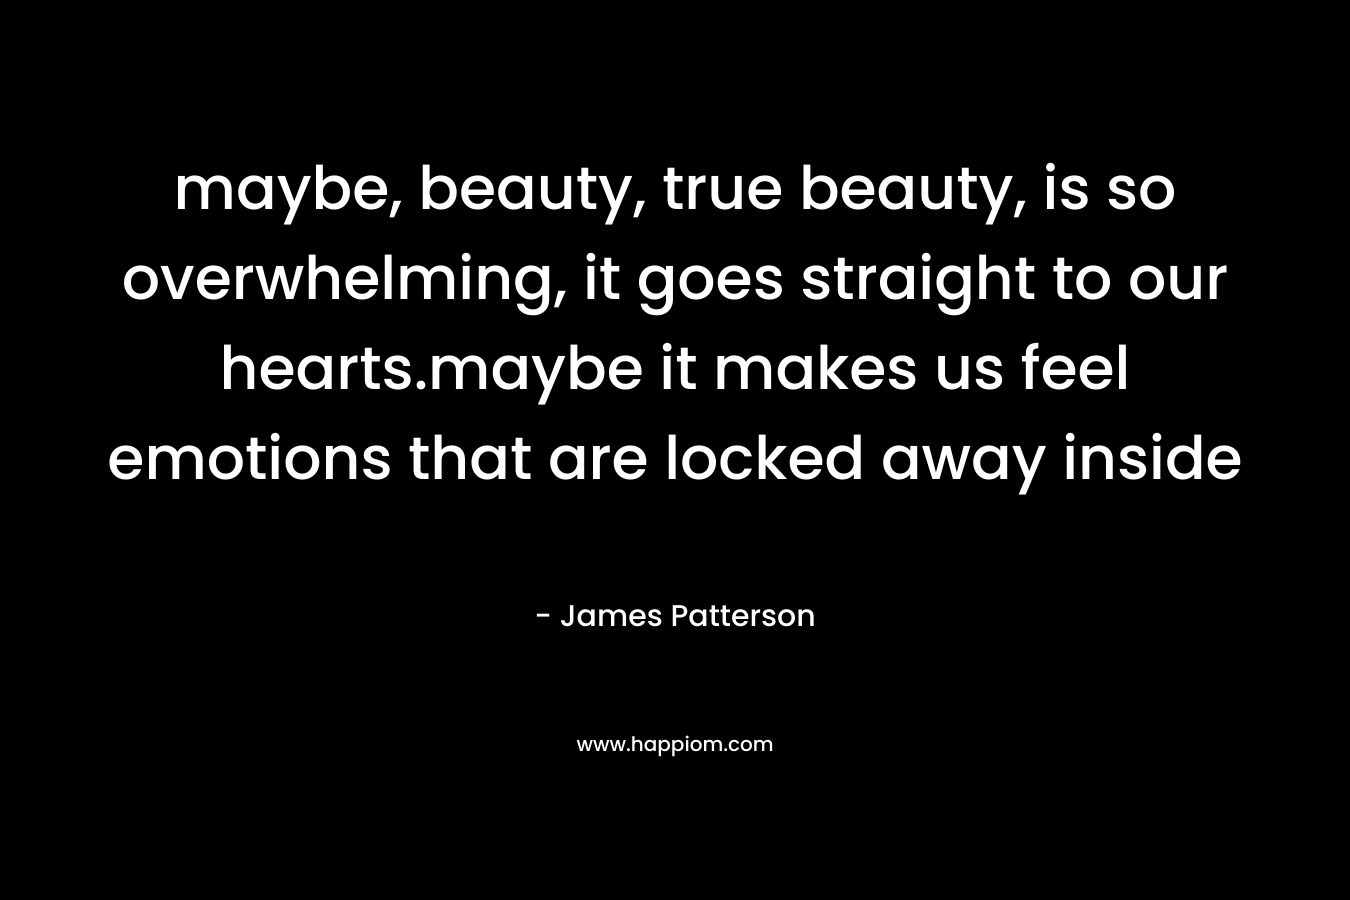 maybe, beauty, true beauty, is so overwhelming, it goes straight to our hearts.maybe it makes us feel emotions that are locked away inside